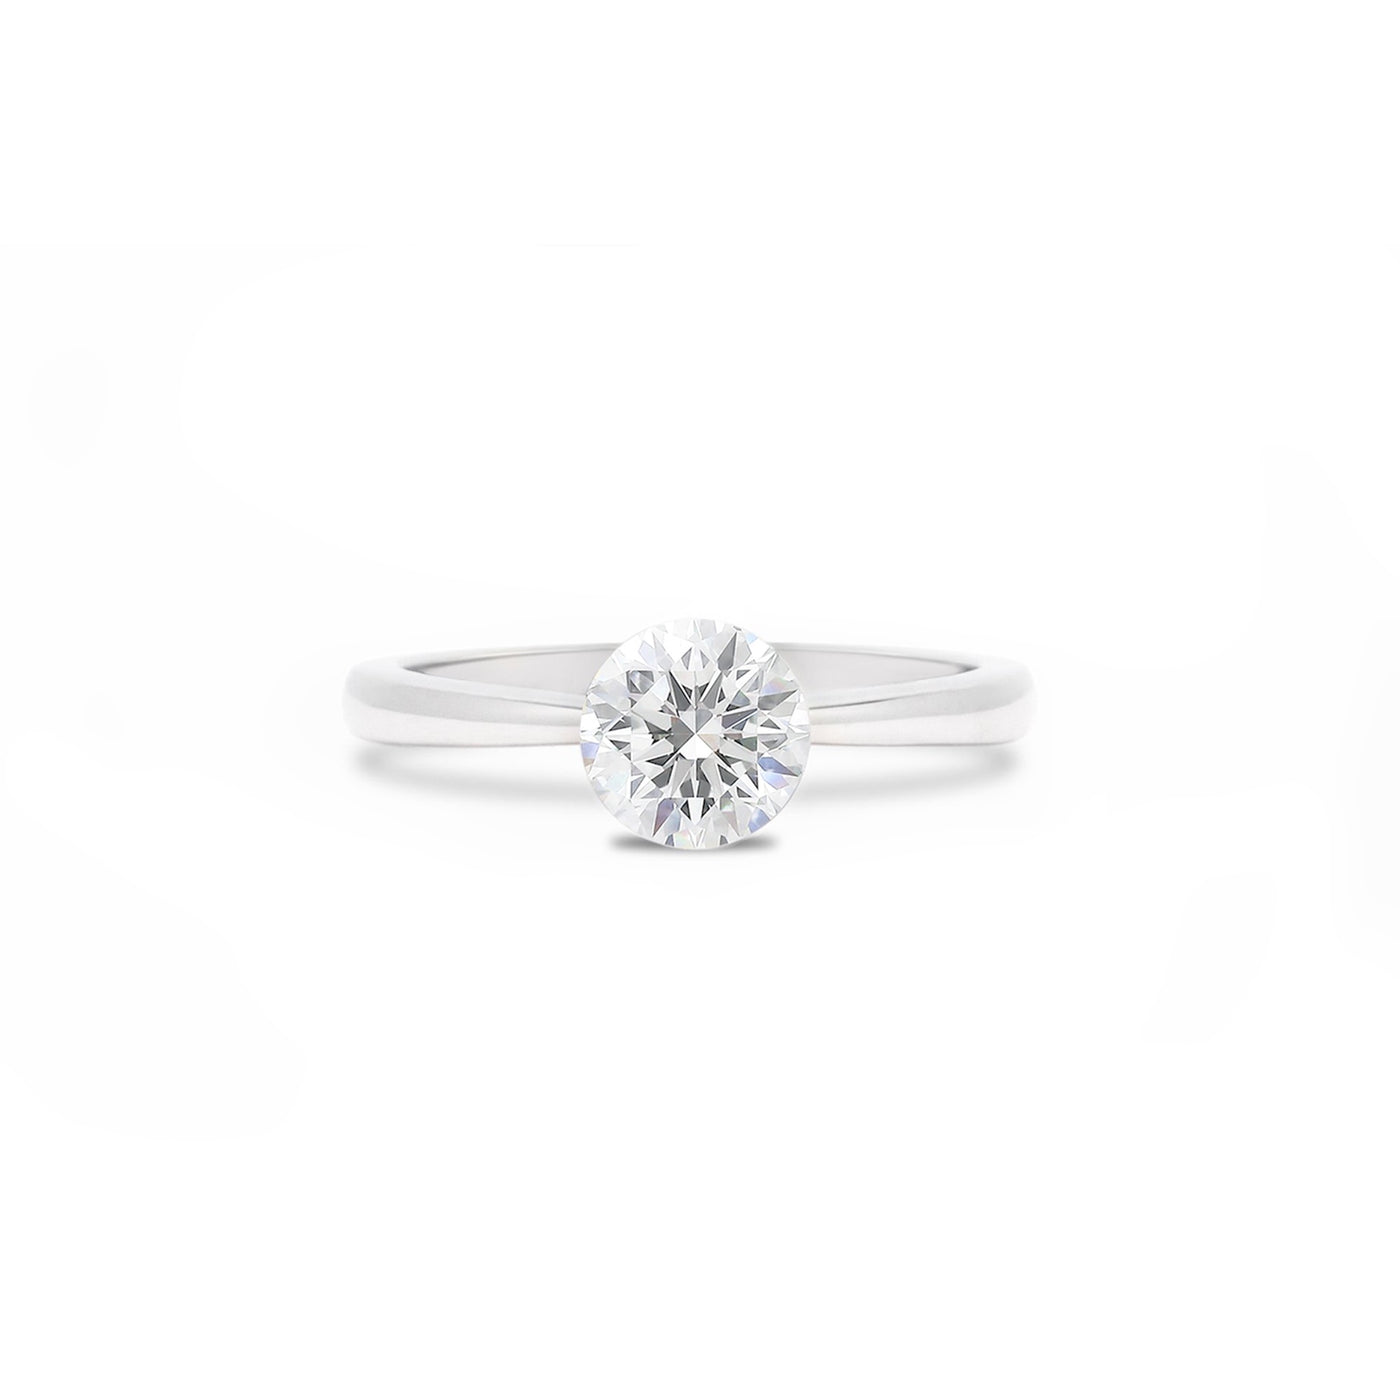 The Floeting Diamond Ring in Platinum | 0.78ct H SI1